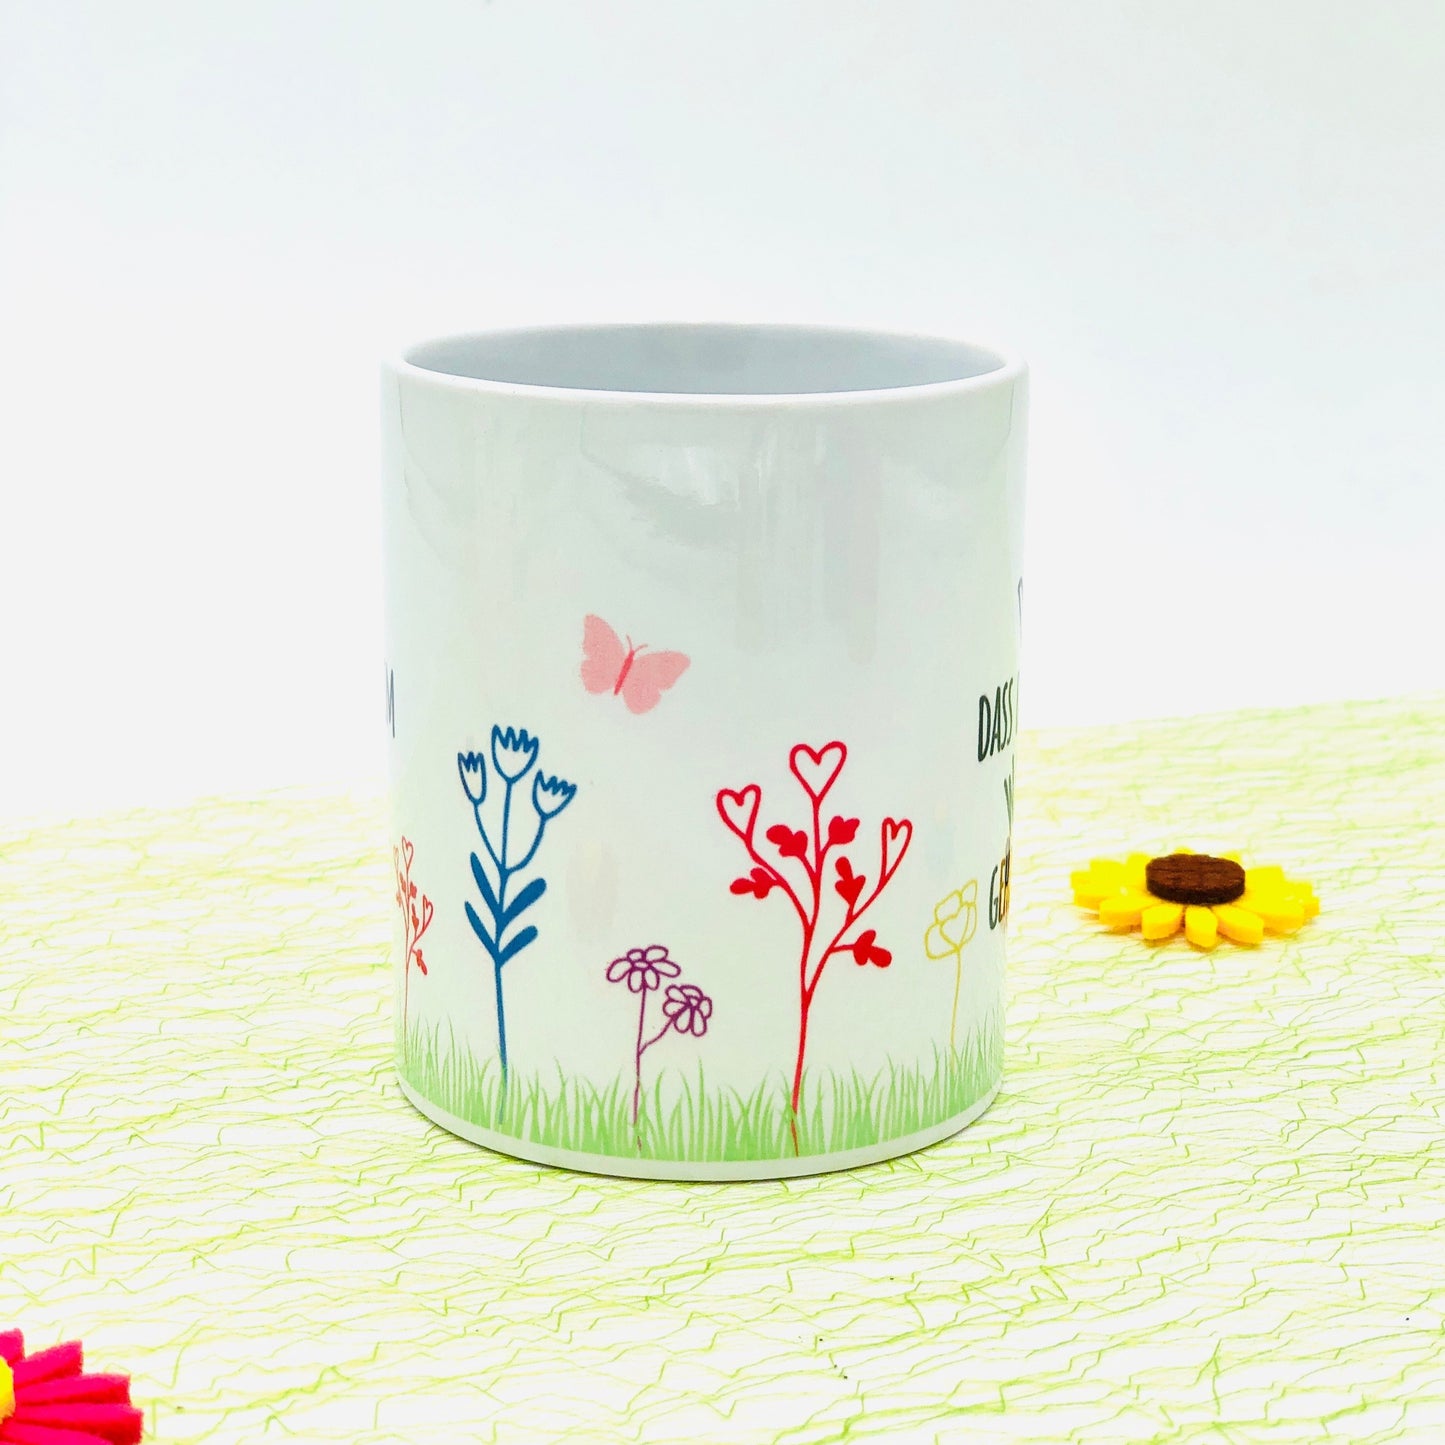 Personalized white cup - "Thank you for helping me/us grow" - farewell gift for teachers, educators, childminders